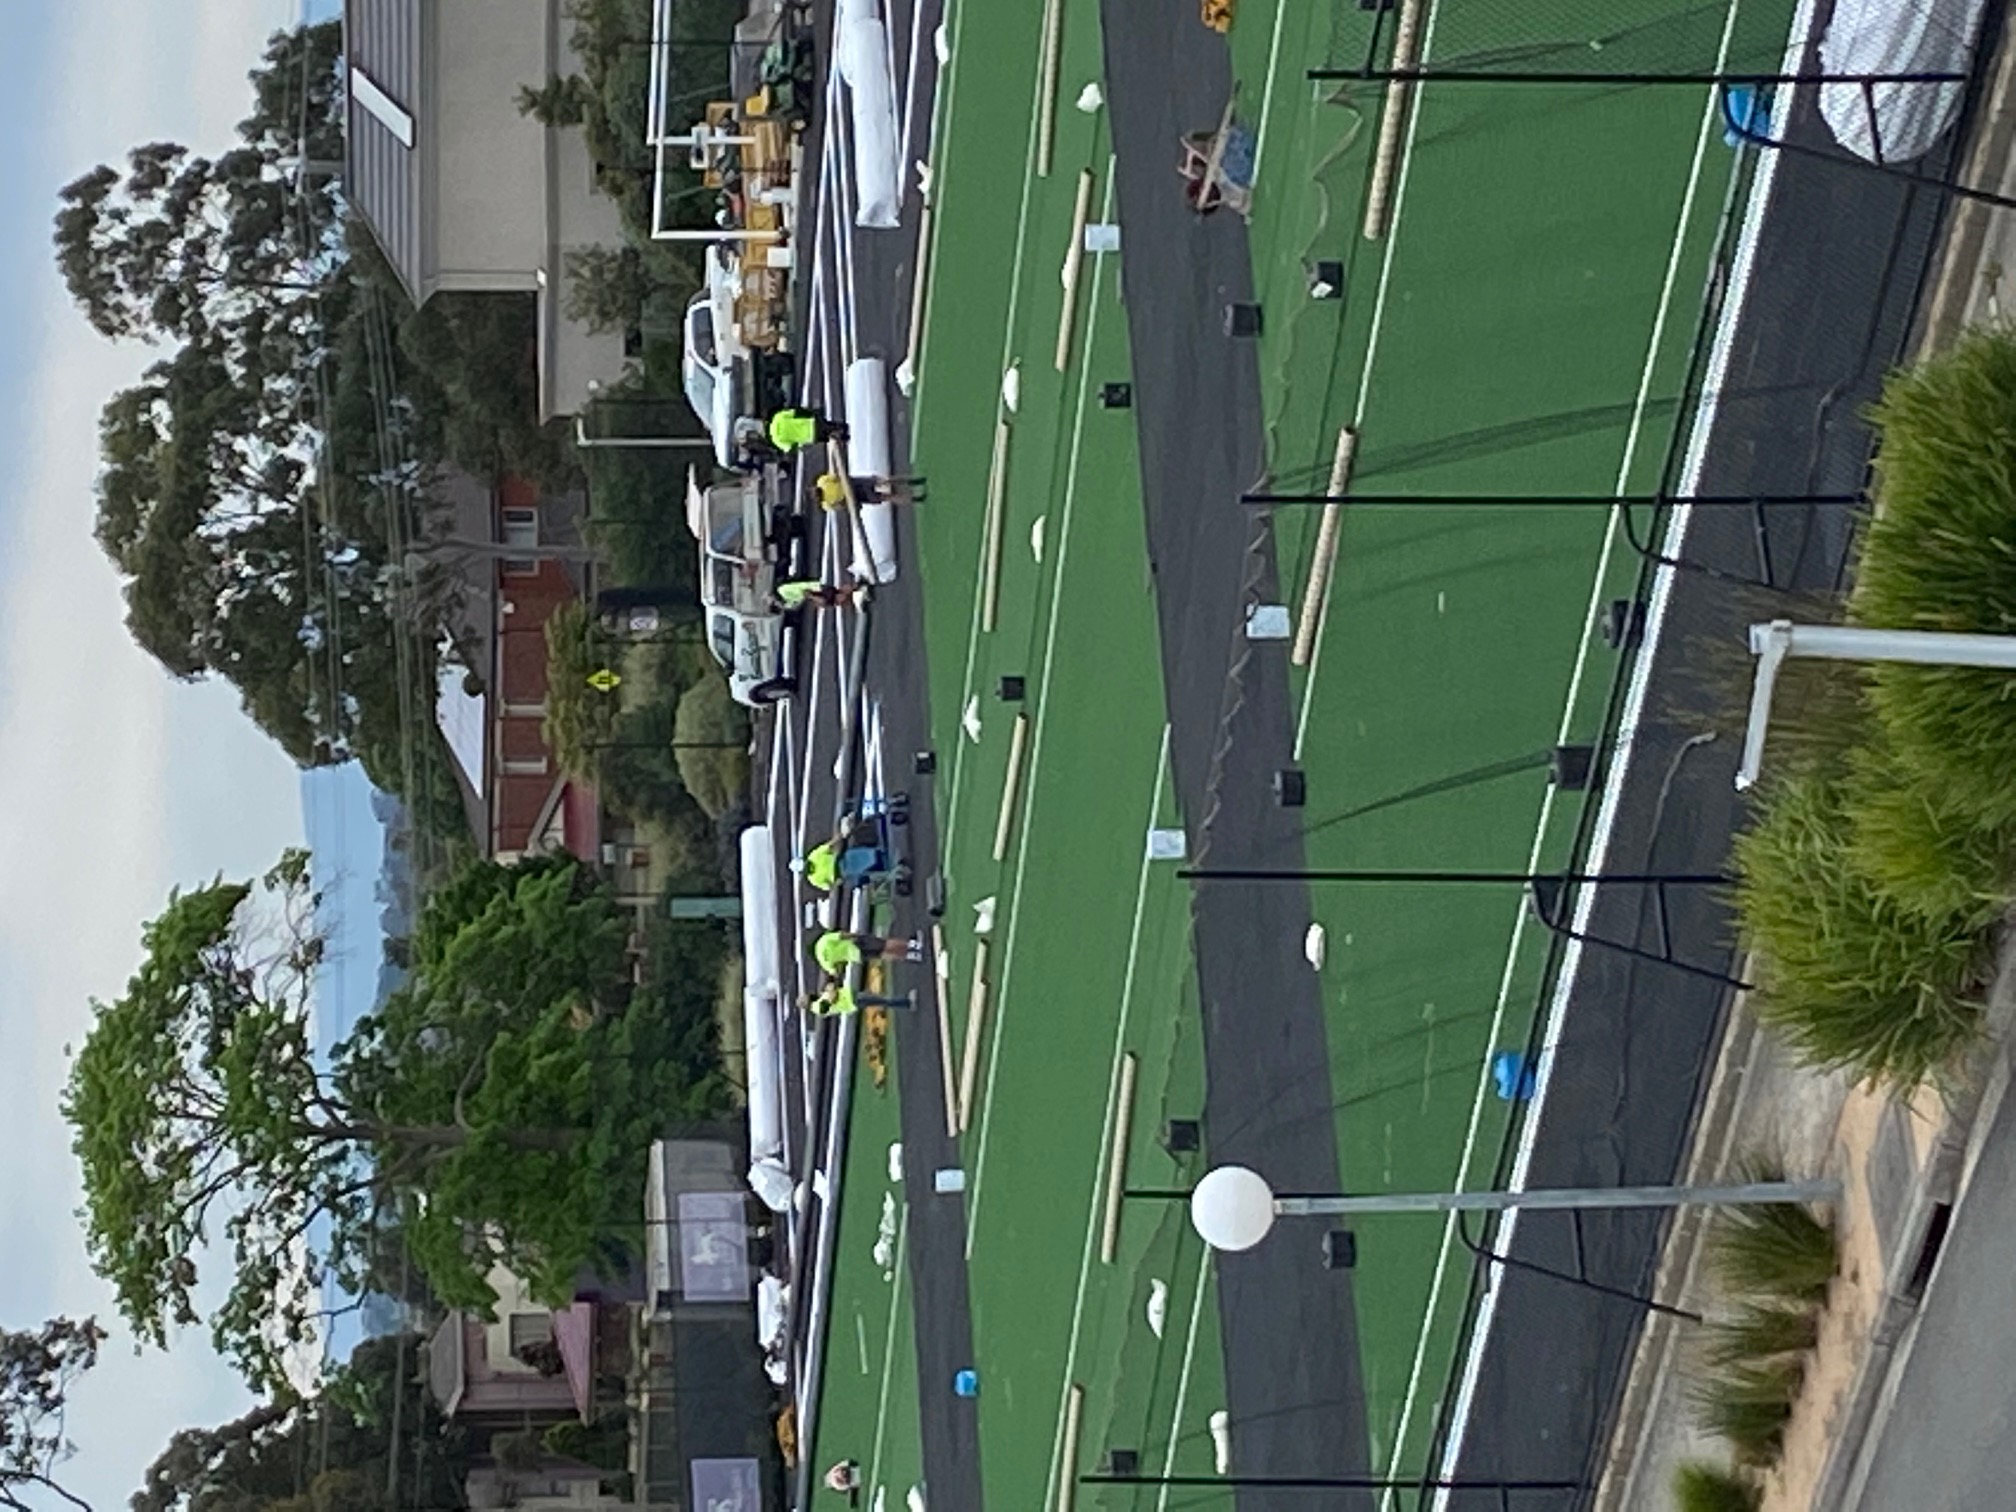 workers resurface the hockey pitch at Glen Waverley Campus